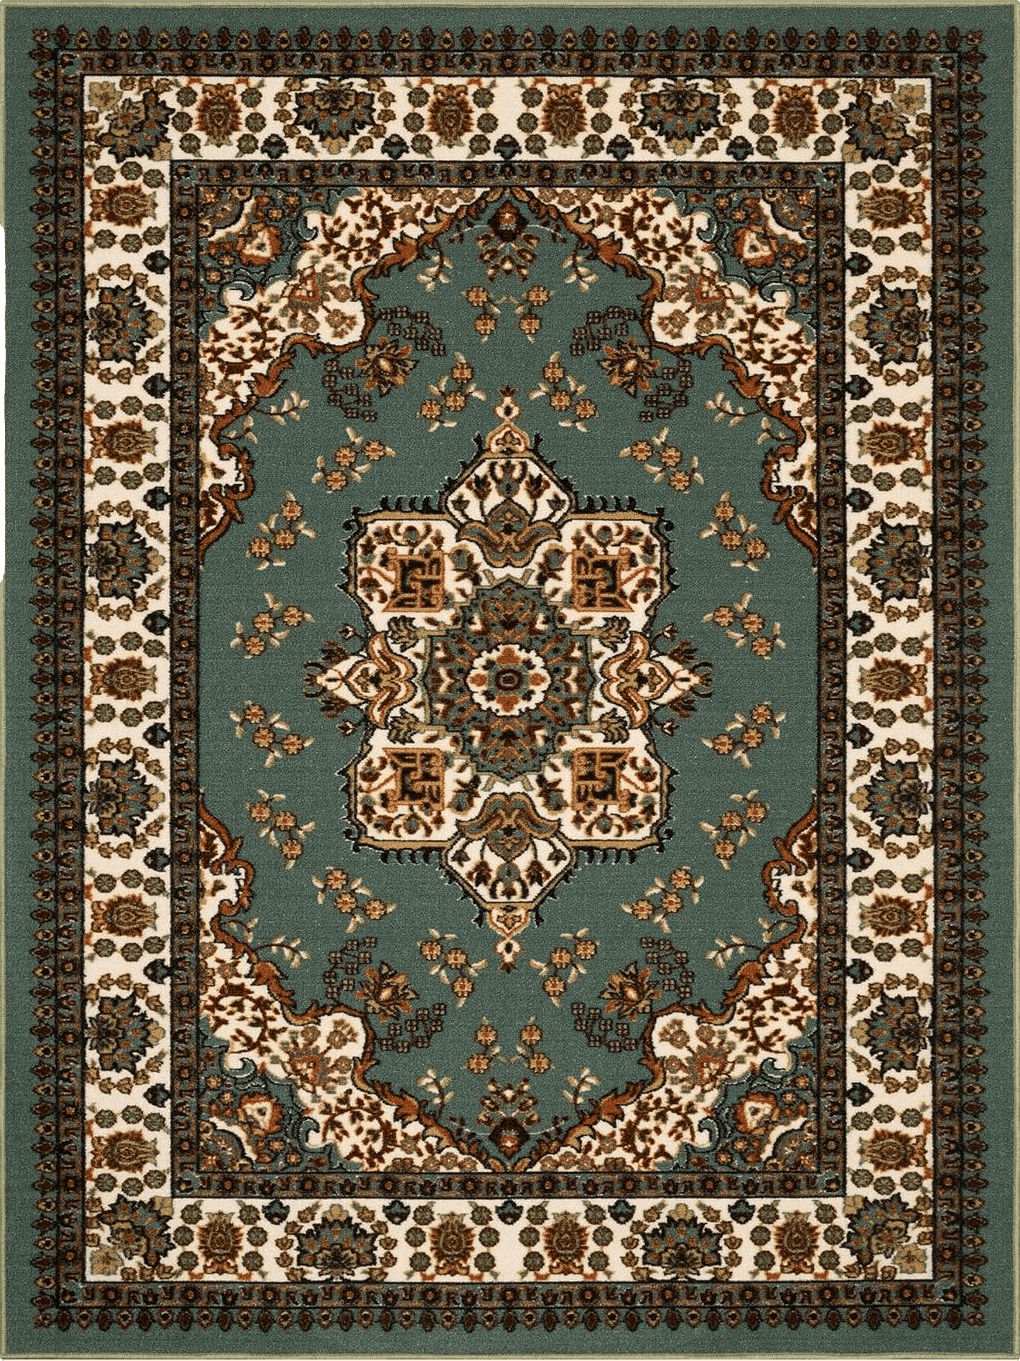 Antep Rugs Alfombras Oriental Traditional 5x7 Non-Skid (Non-Slip) Low Profile Pile Rubber Backing Indoor Area Rugs (Green, 5' x 7')